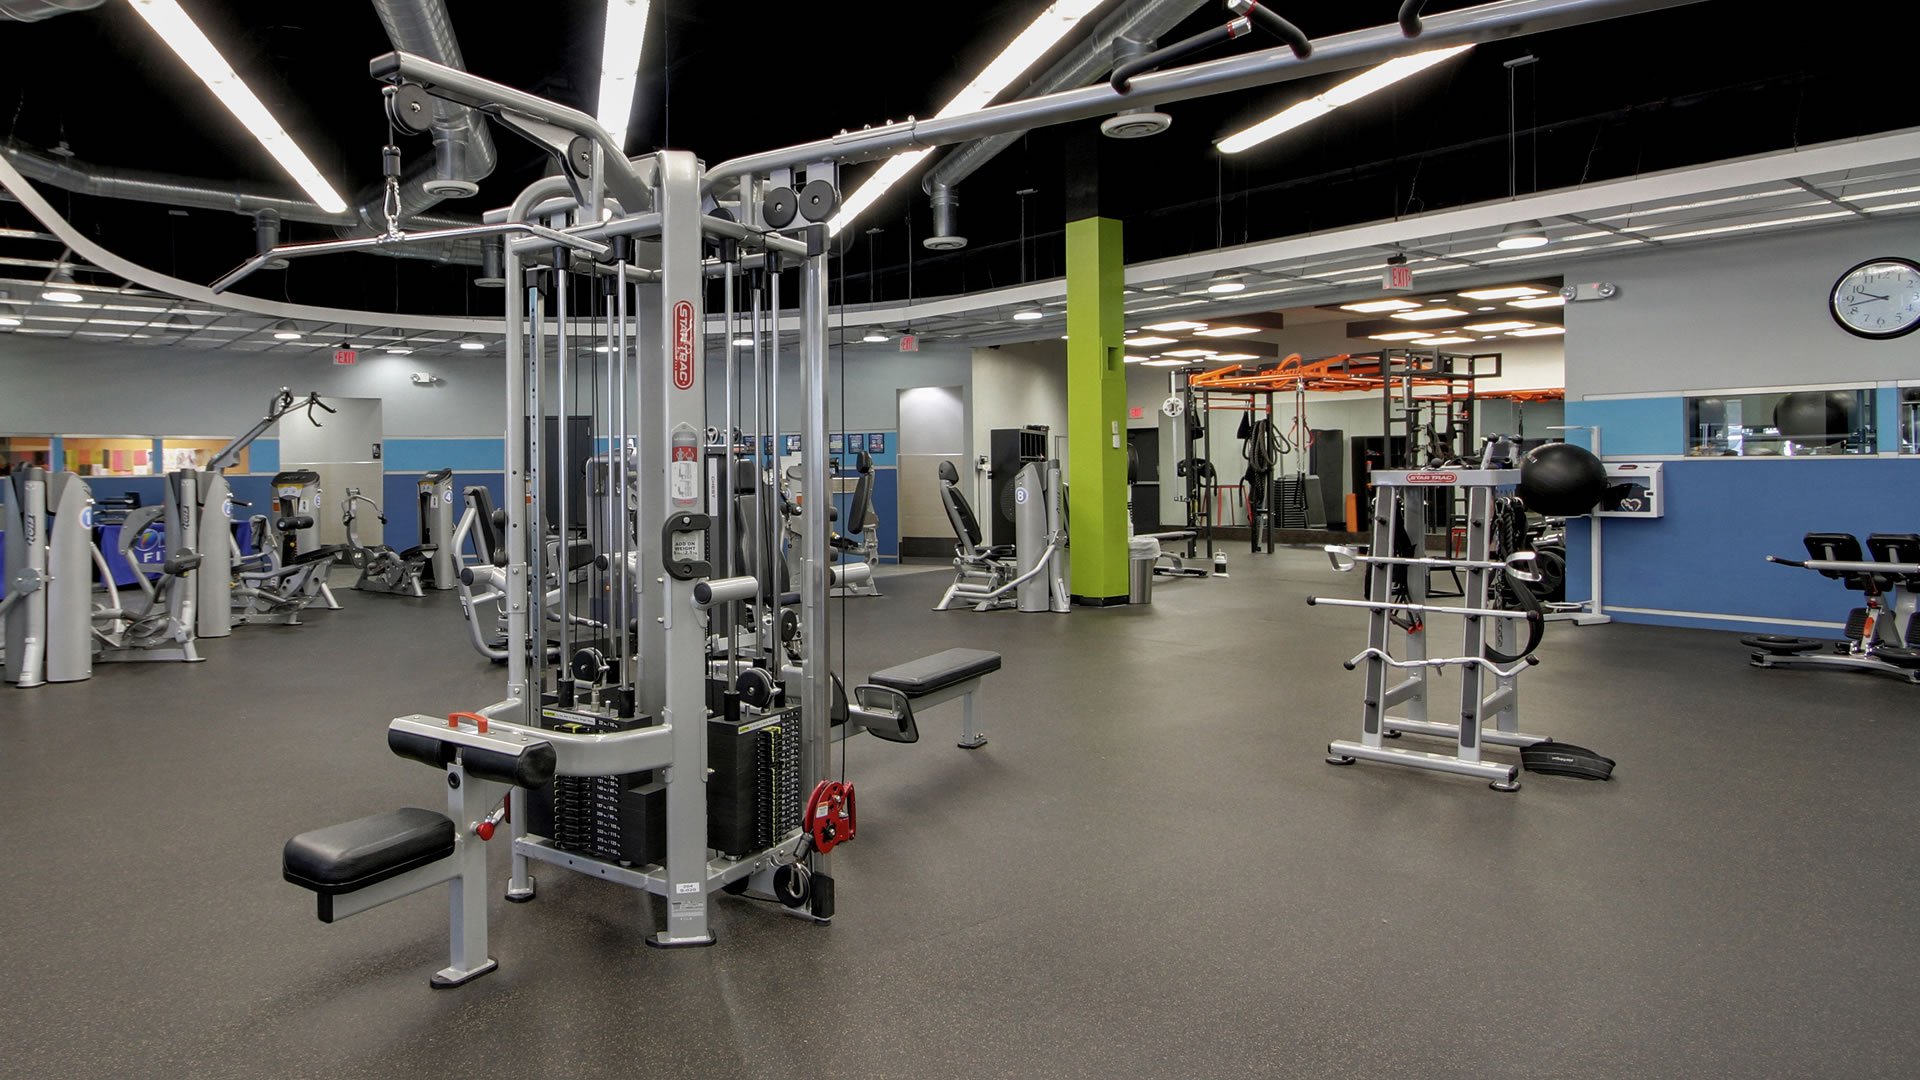 Onelife Fitness Greenbrier Gym Chesapeake Va - All Photos ...